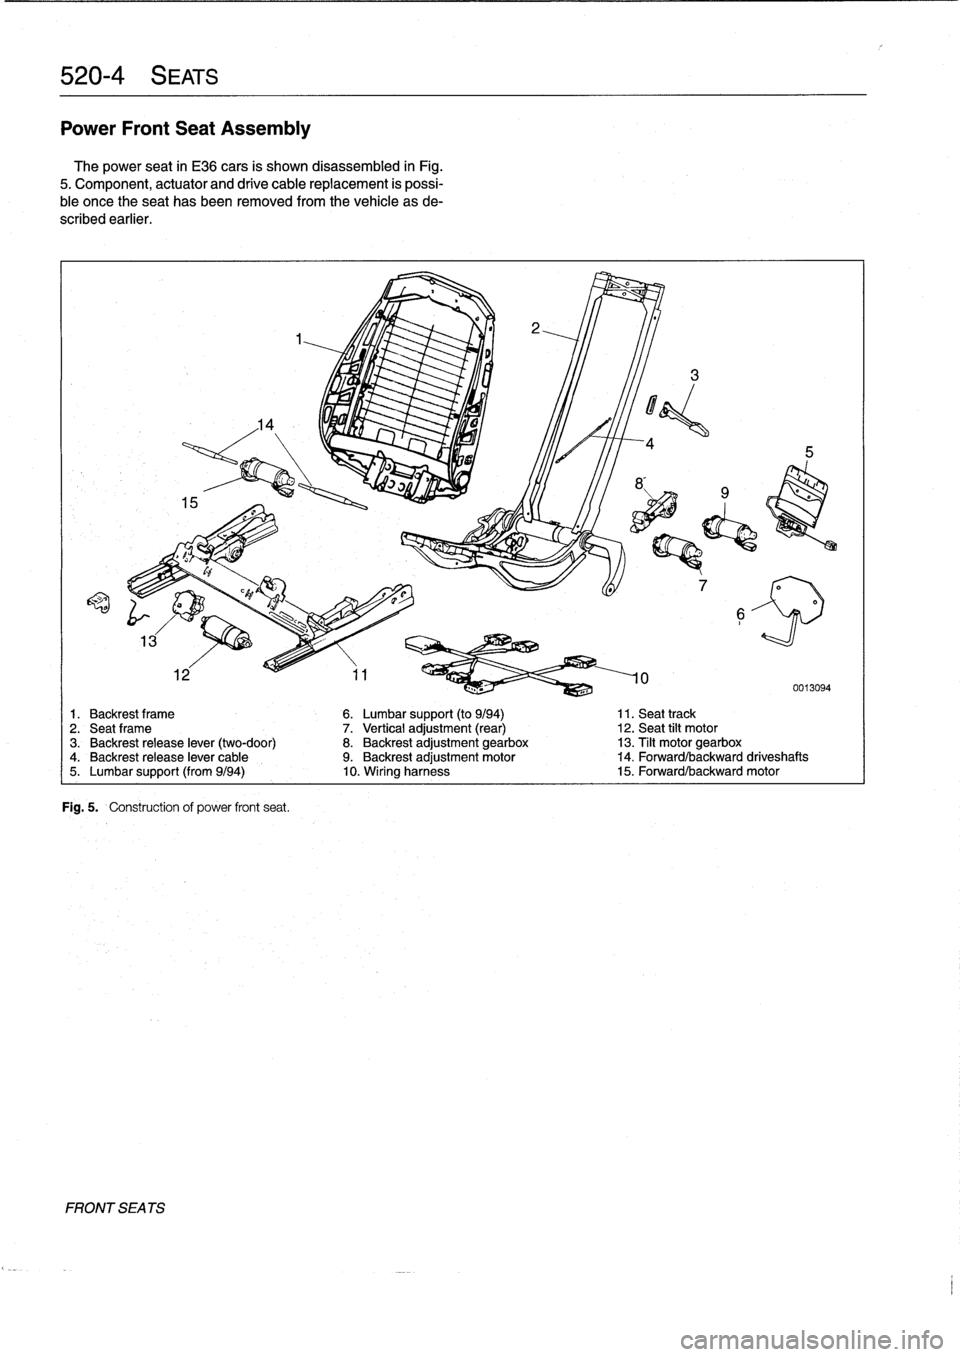 BMW 323i 1995 E36 Workshop Manual 
520-
4
SEATS

Power
Front
Seat
Assembly
The
power
seat
in
E36
cars
is
shown
disassembled
in
Fig
.

5
.
Component,
actuator
and
drive
cable
replacement
is
possi-
ble
once
theseat
has
been
removed
from